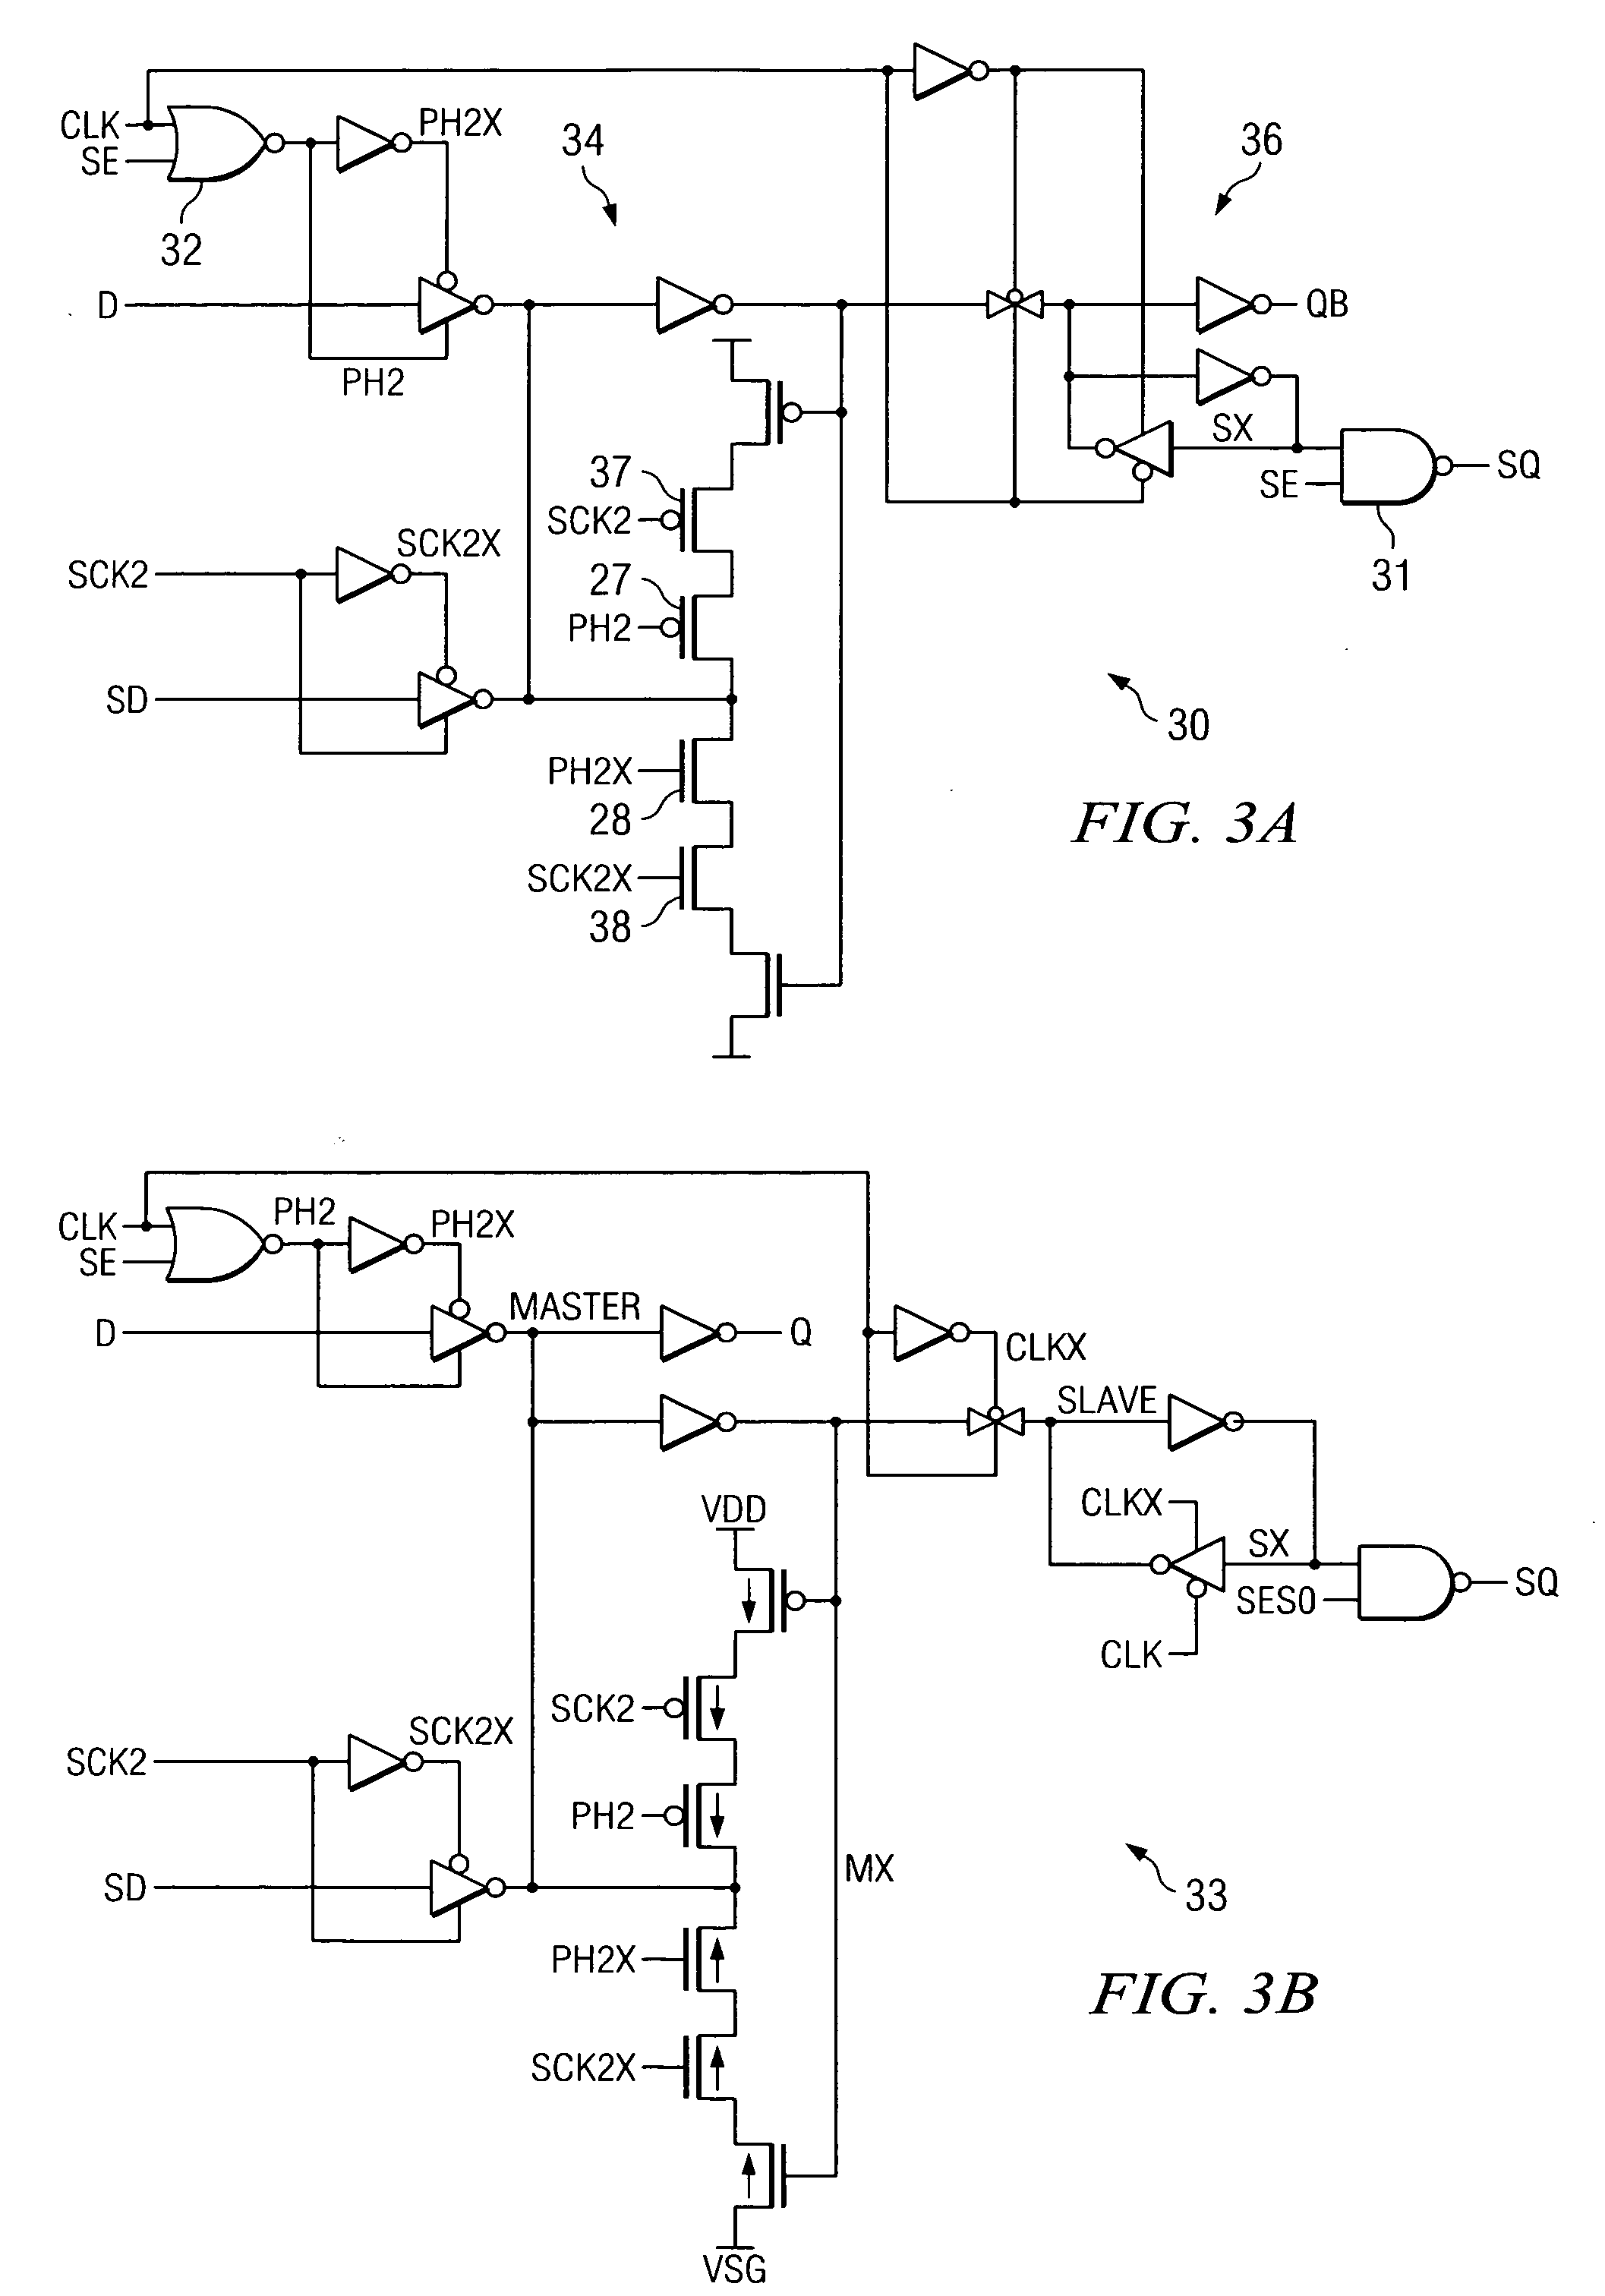 Digital design component with scan clock generation